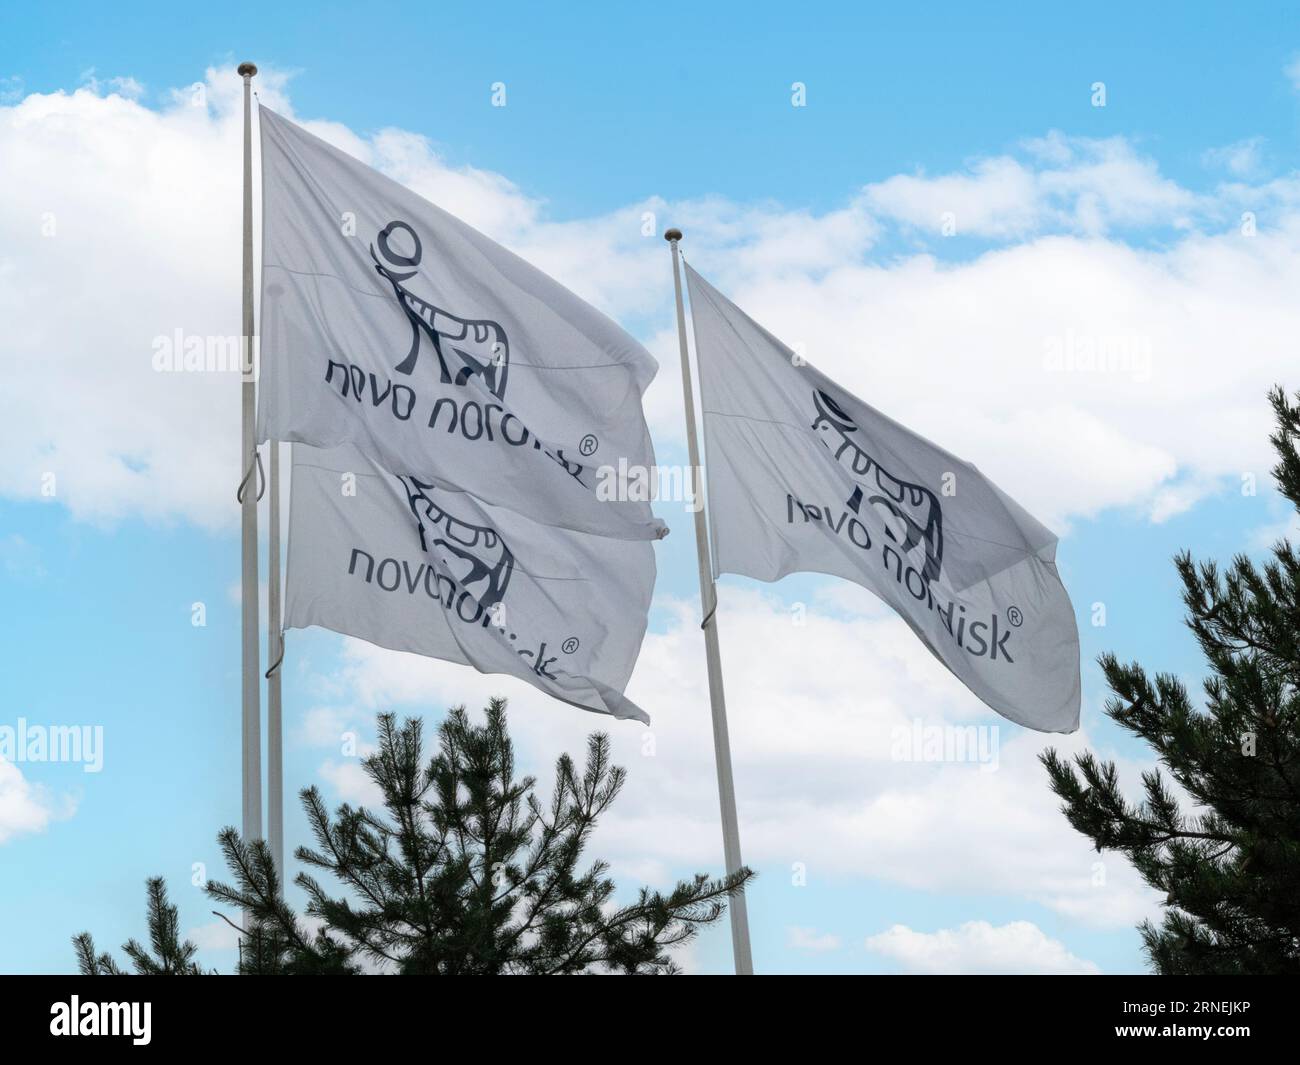 Novo Nordisk flags waving from a flagpole with blue sky background. A pharmaceutical company headquartered in Denmark. Copenhagen, Denmark - august 12 Stock Photo